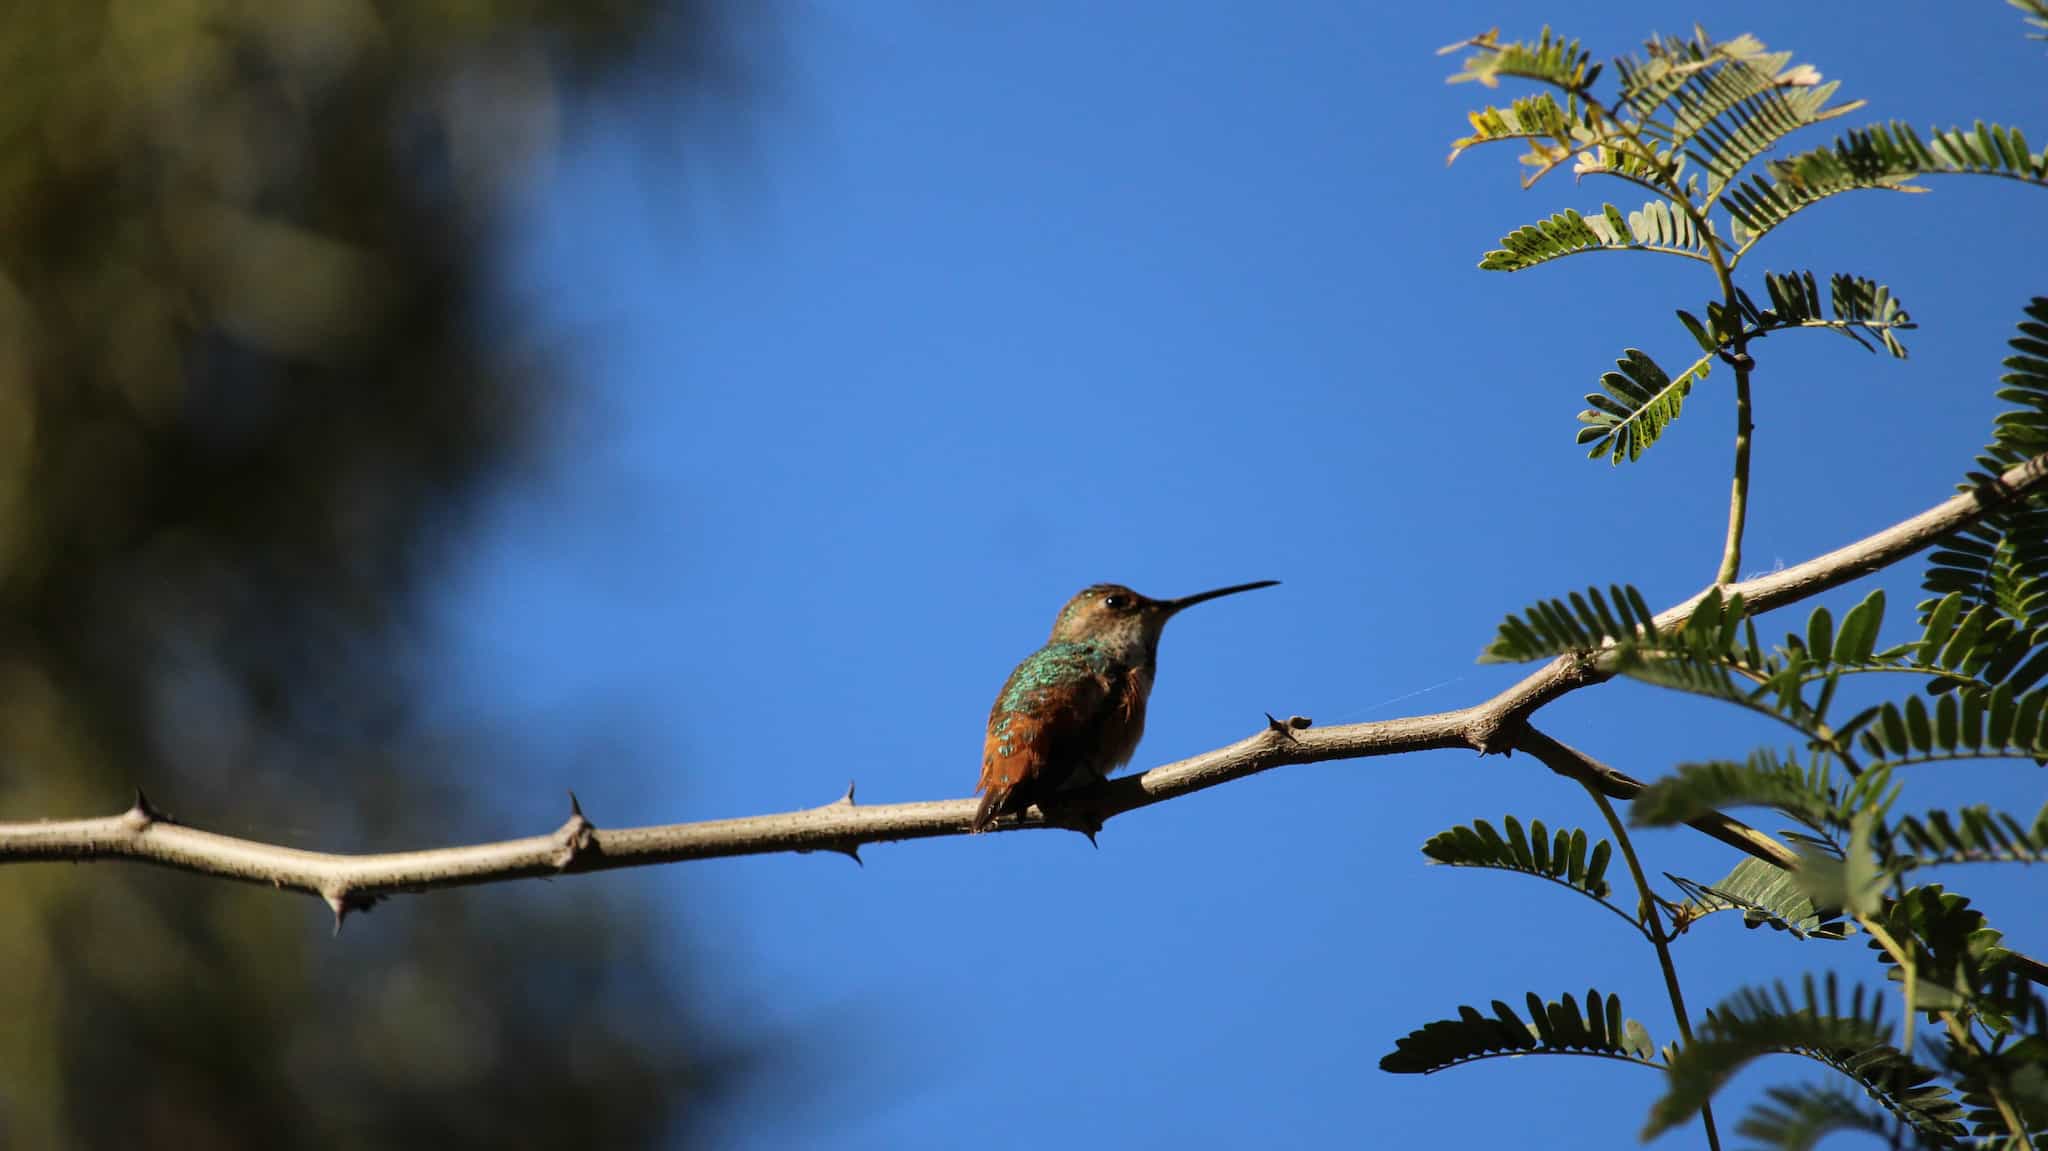 Hummingbird with a vibrant green back in the sunlight perched on a long, horizontal, thorny branch with small leaves at one end.